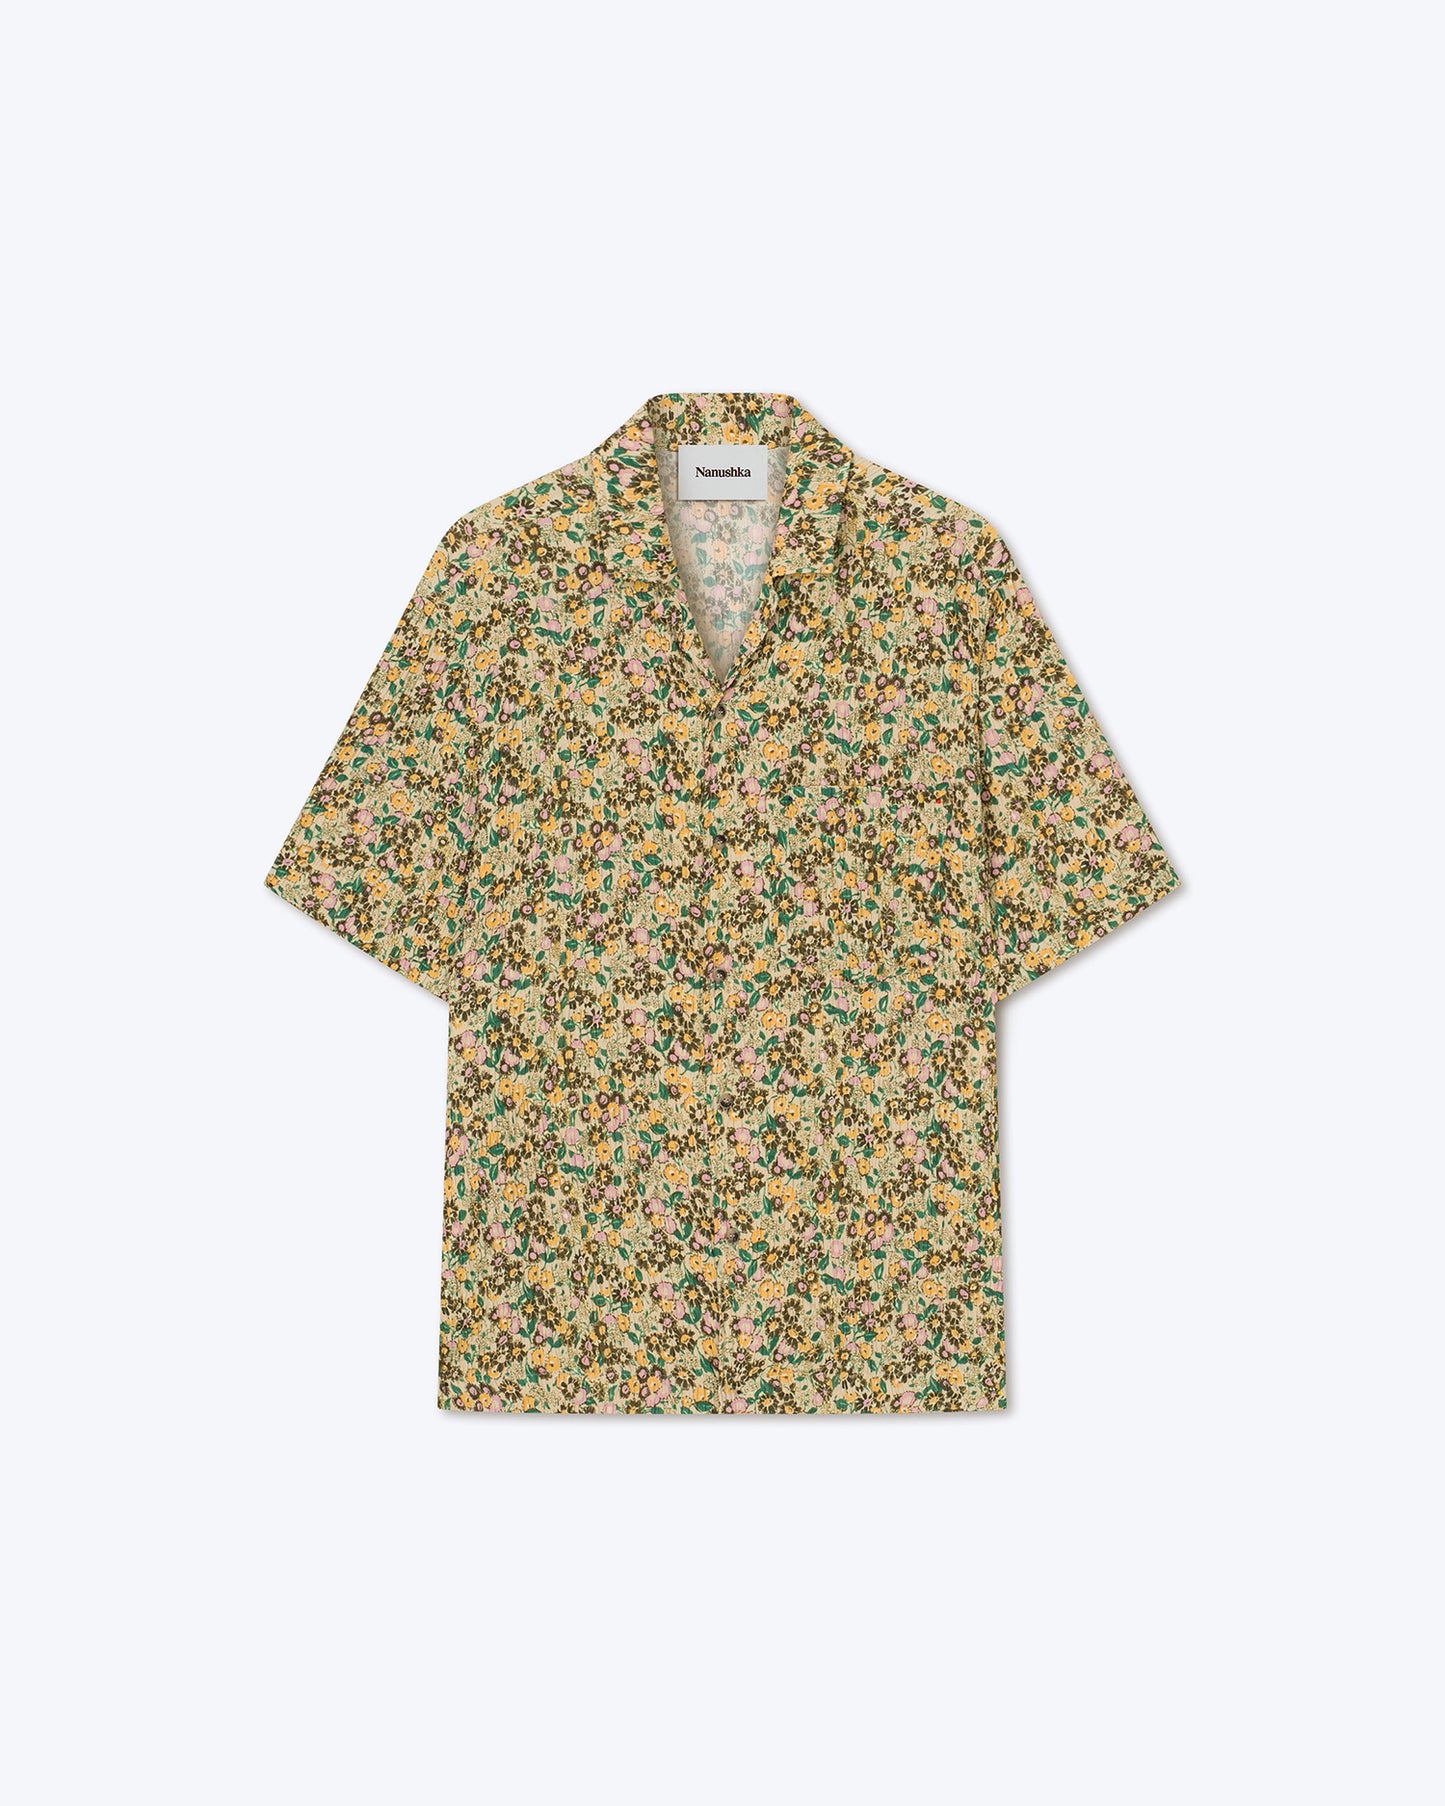 Bodil - 60'S Pleat Shirt - Ditsy Floral